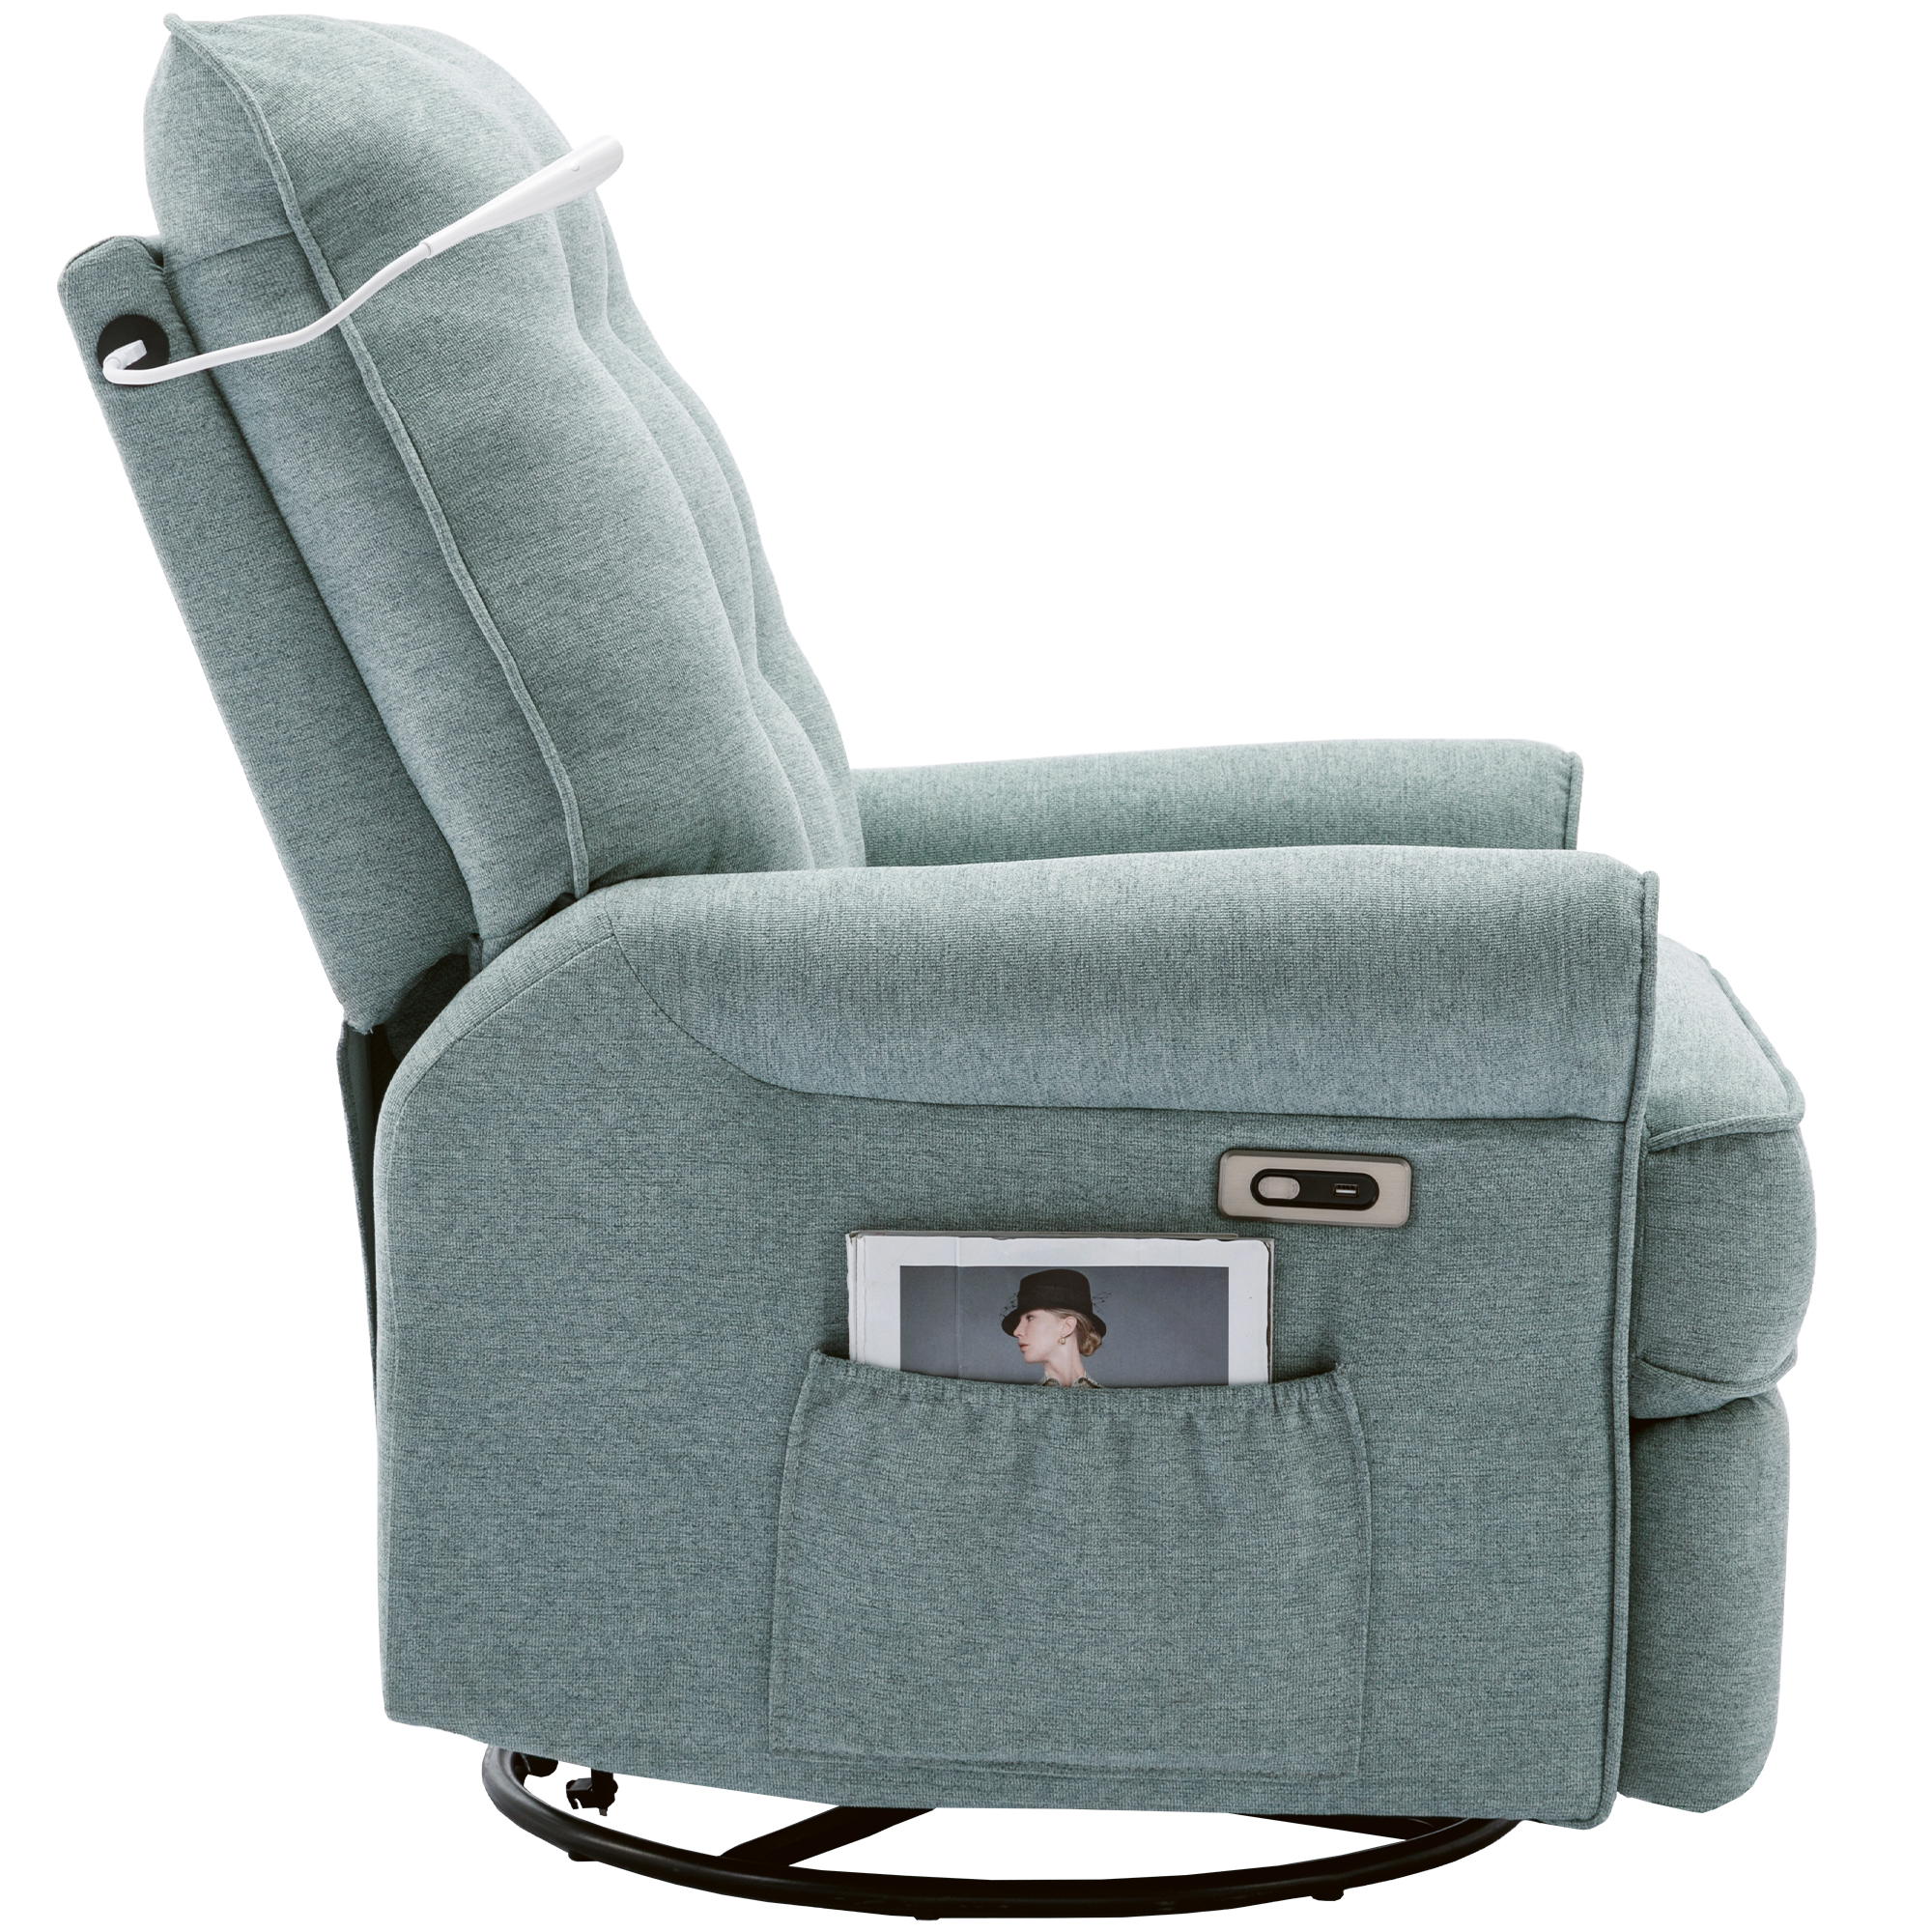 270 Degree Swivel Recliner Chairs With USB Port, Side Pocket And Touch Sensitive Lamp - SG000910AAC